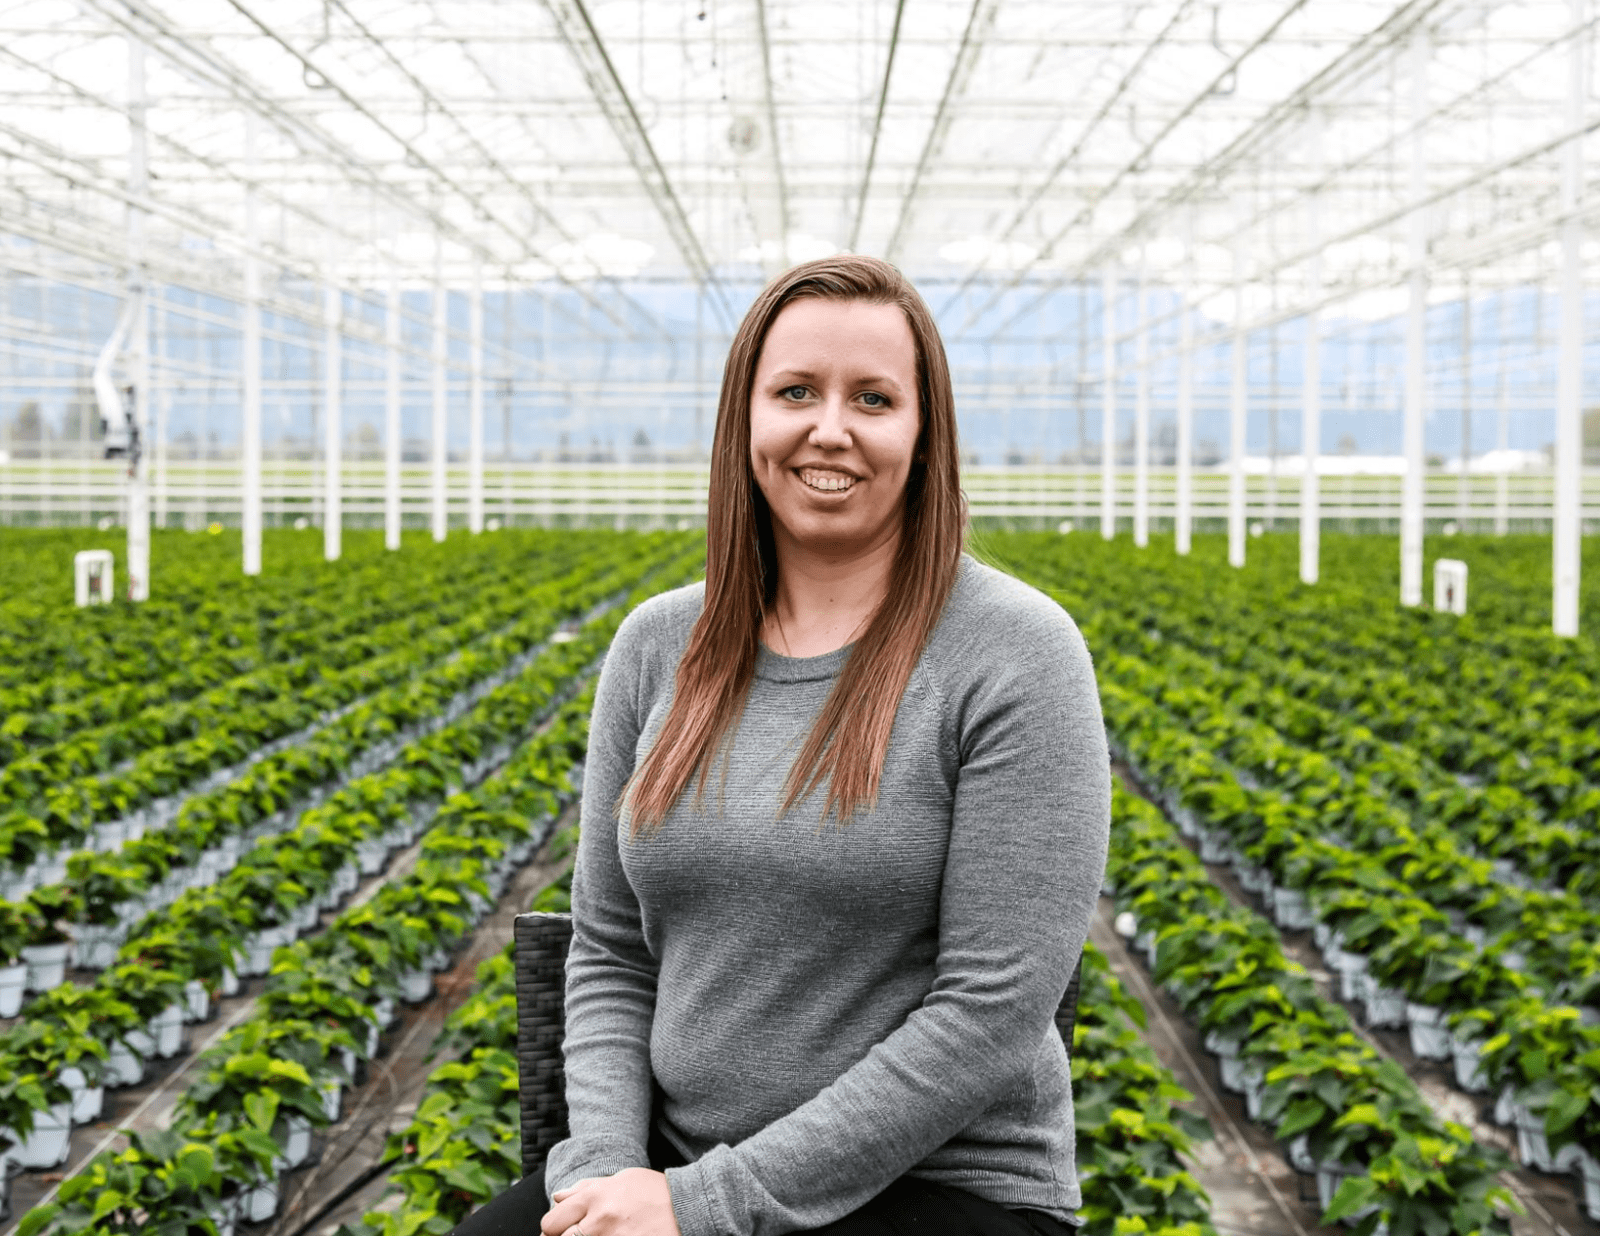 A brown haired women sitting in the middle of a greenhouse filled with green poinsettias.